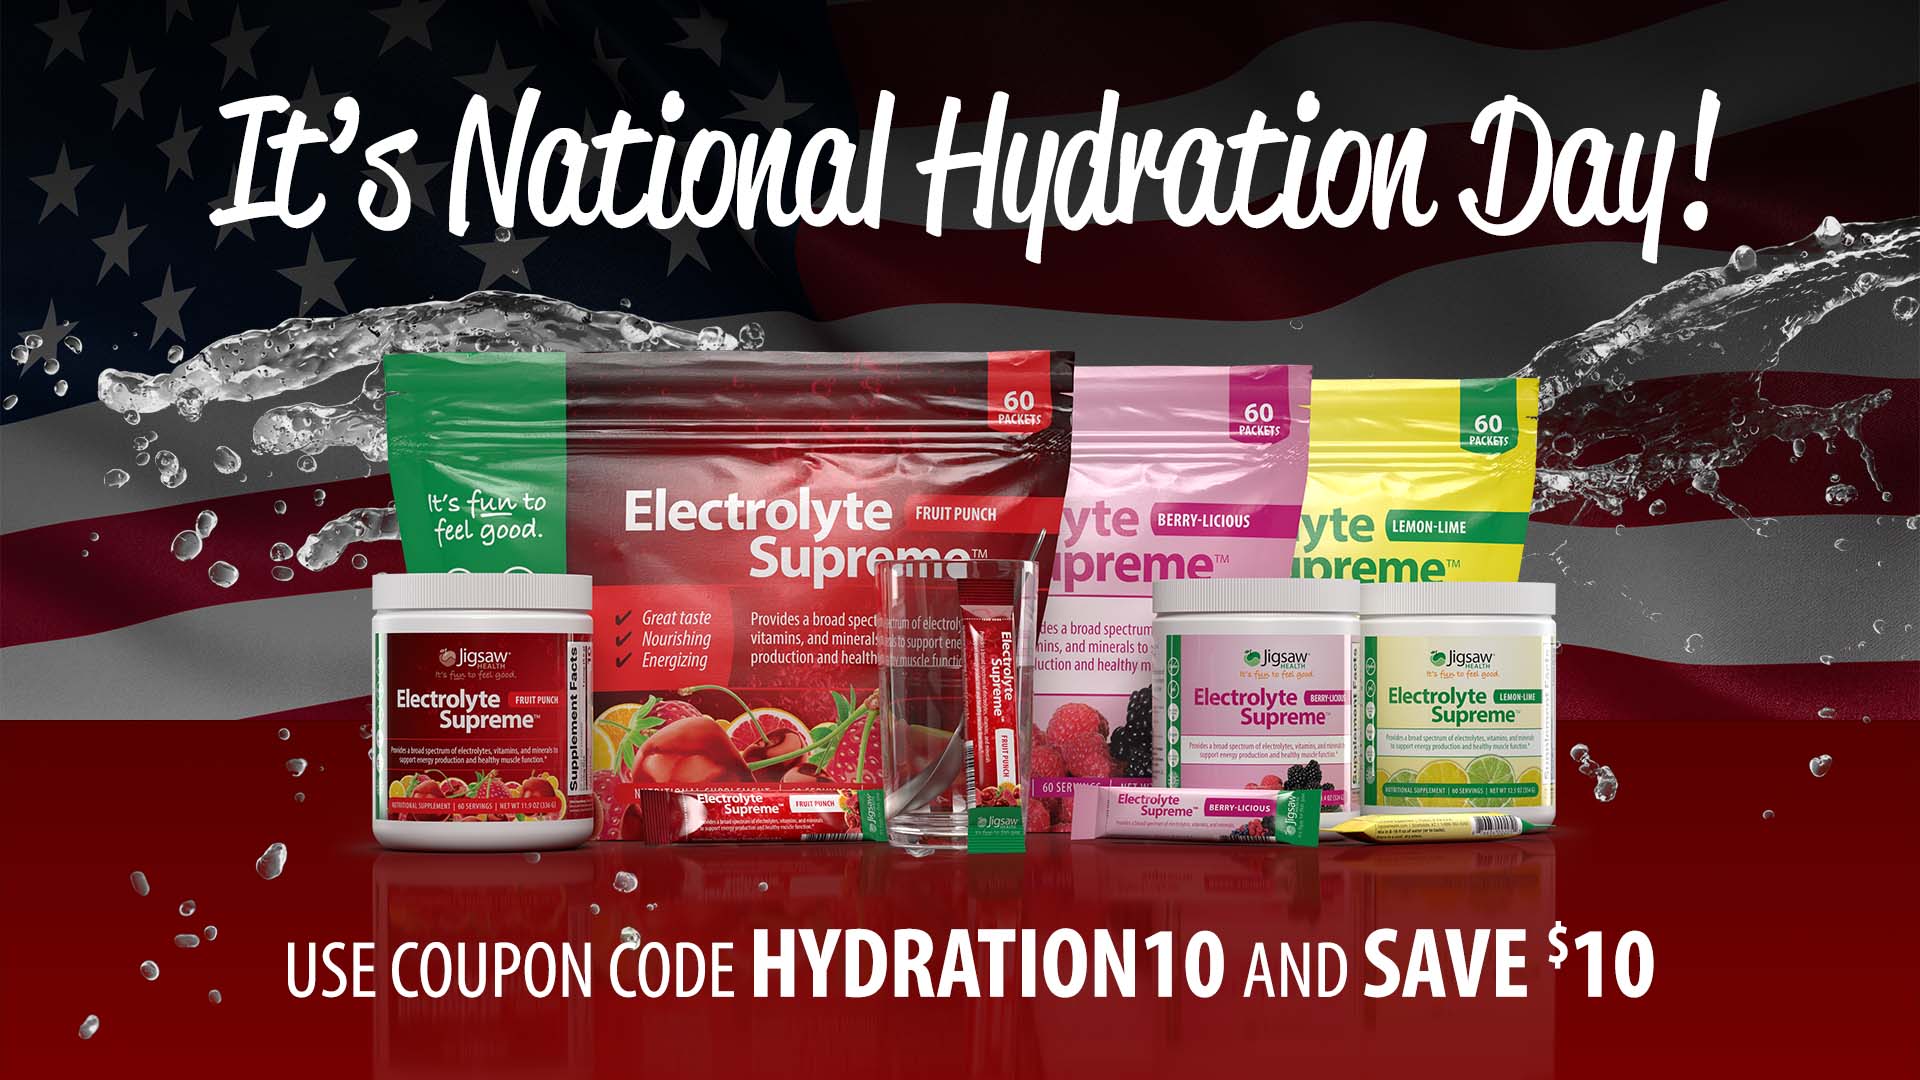 National Hydration Day - June 23, 2021